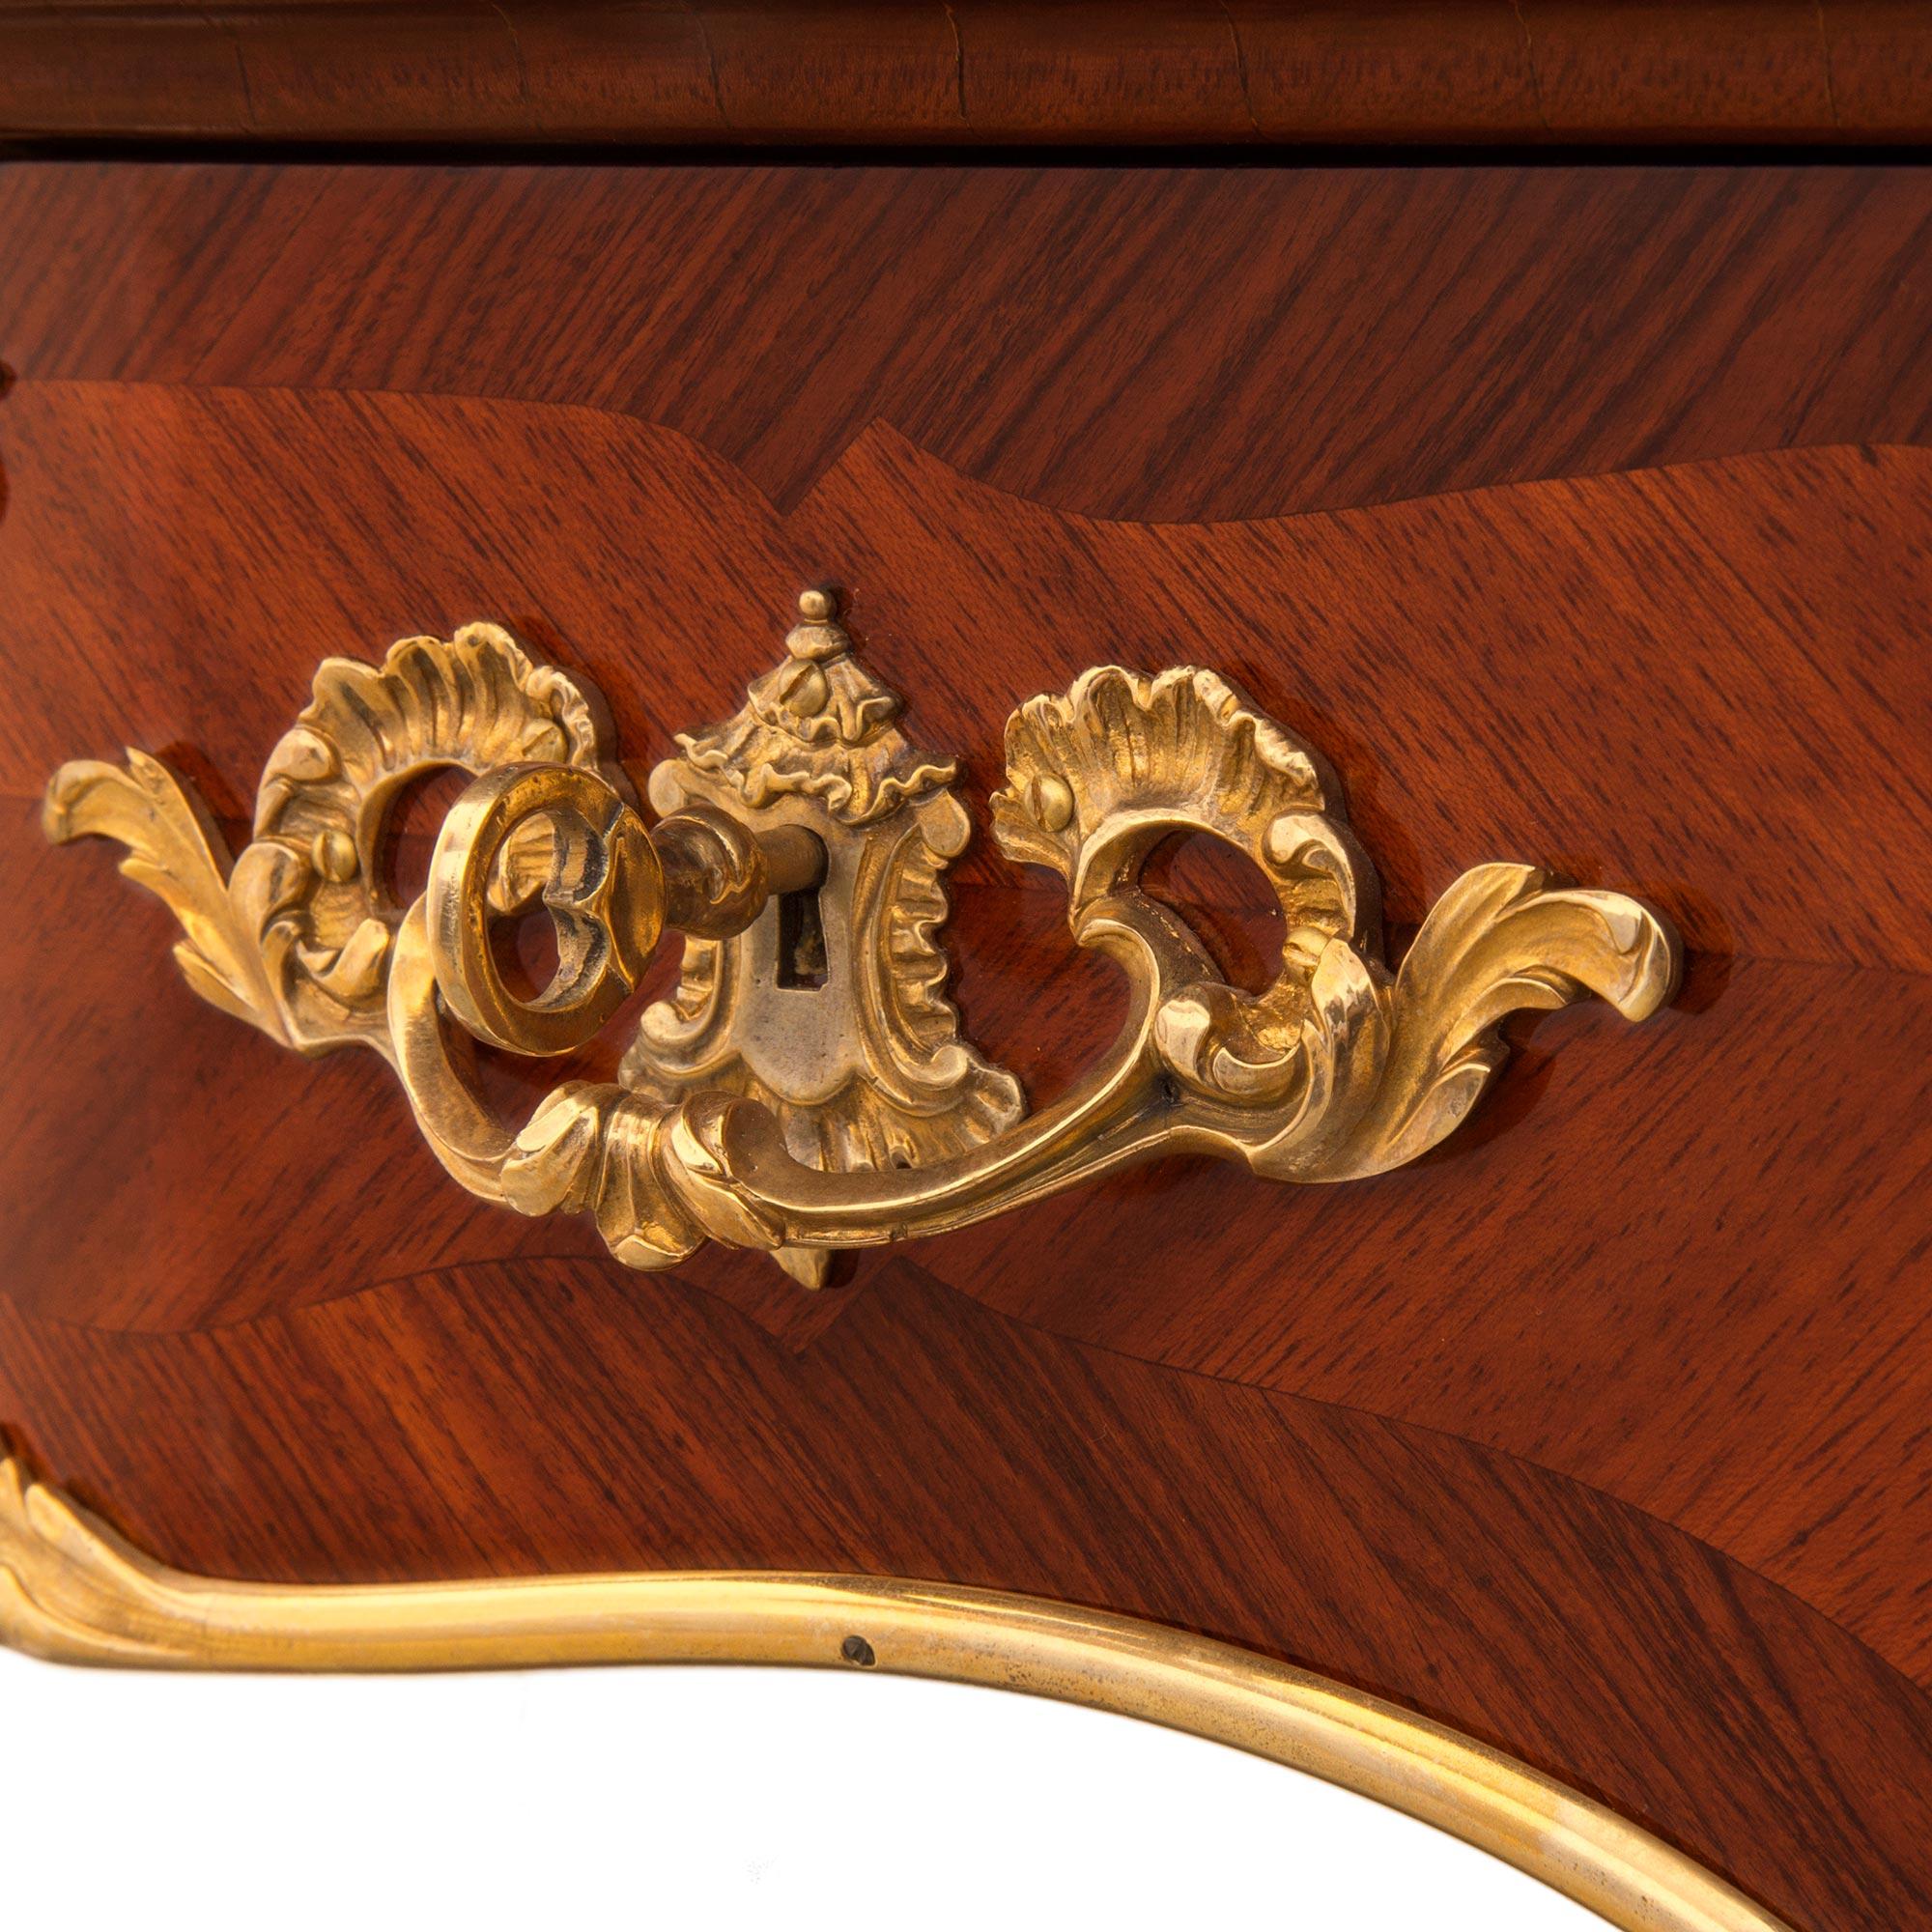 French Mid-19th Century Louis XV Style Kingwood and Ormolu Bureau Plat For Sale 4